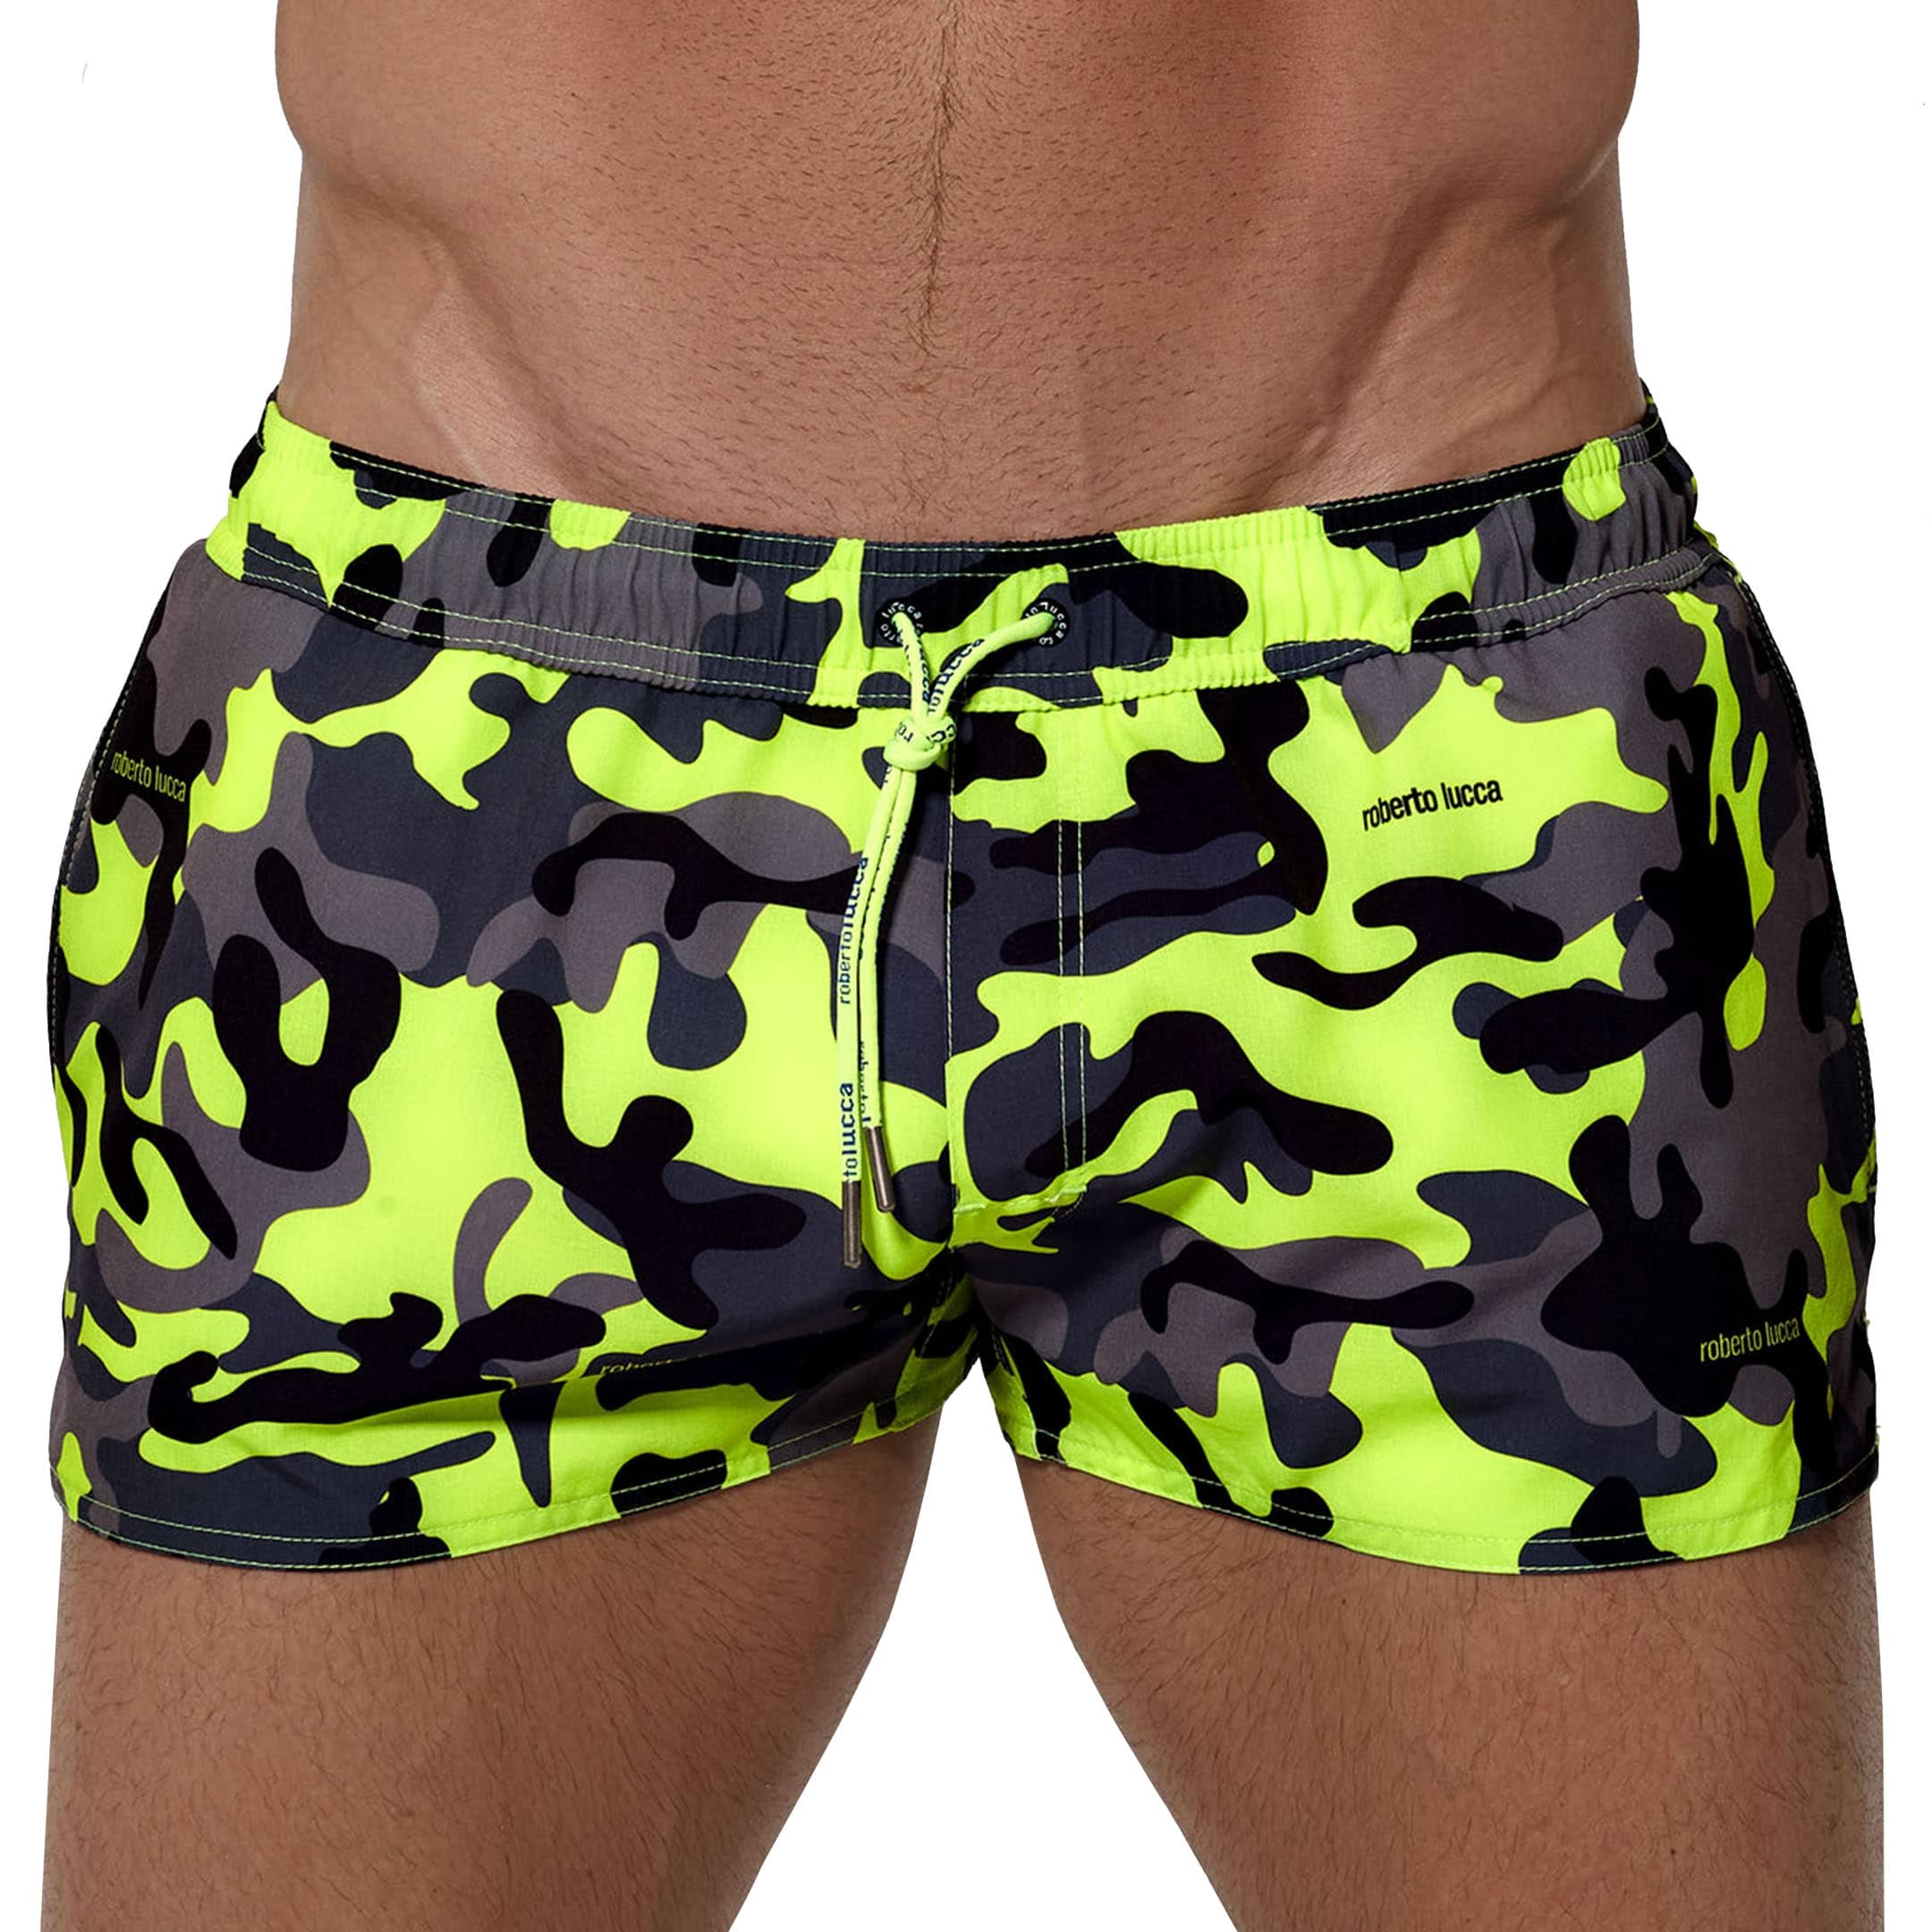 Roberto Lucca Camouflage Swim Shorts - Lime | INDERWEAR